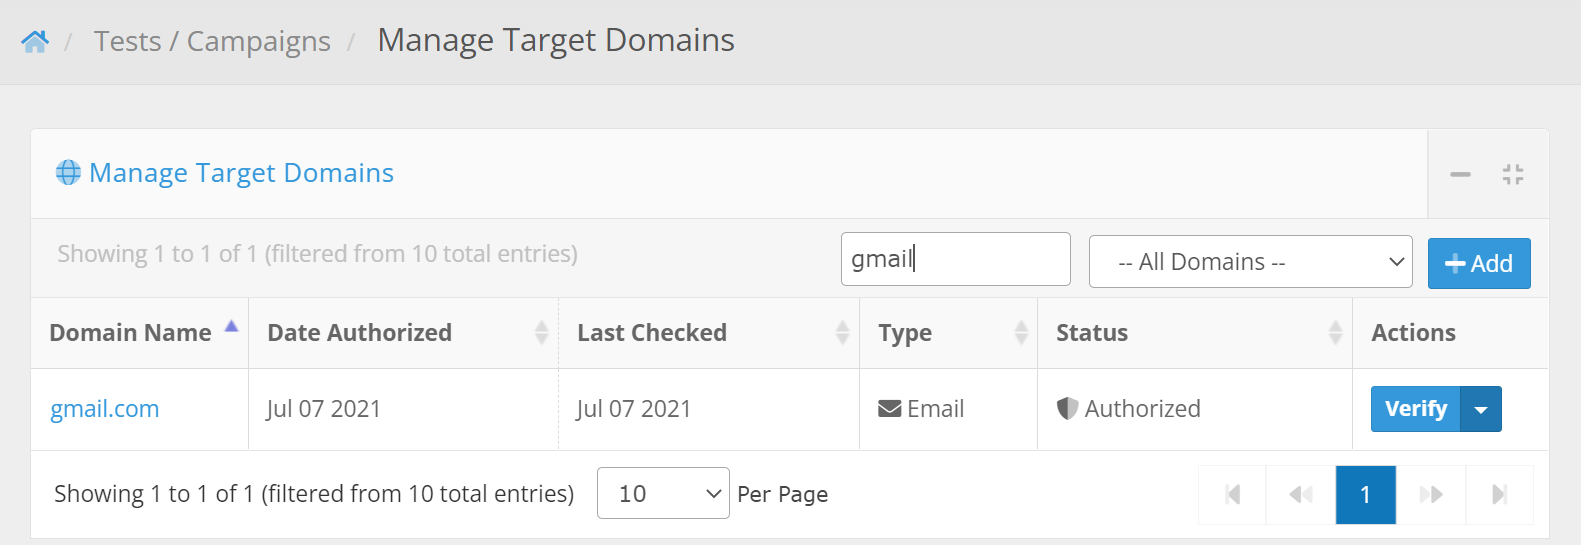 Manage_Target_Domains.png